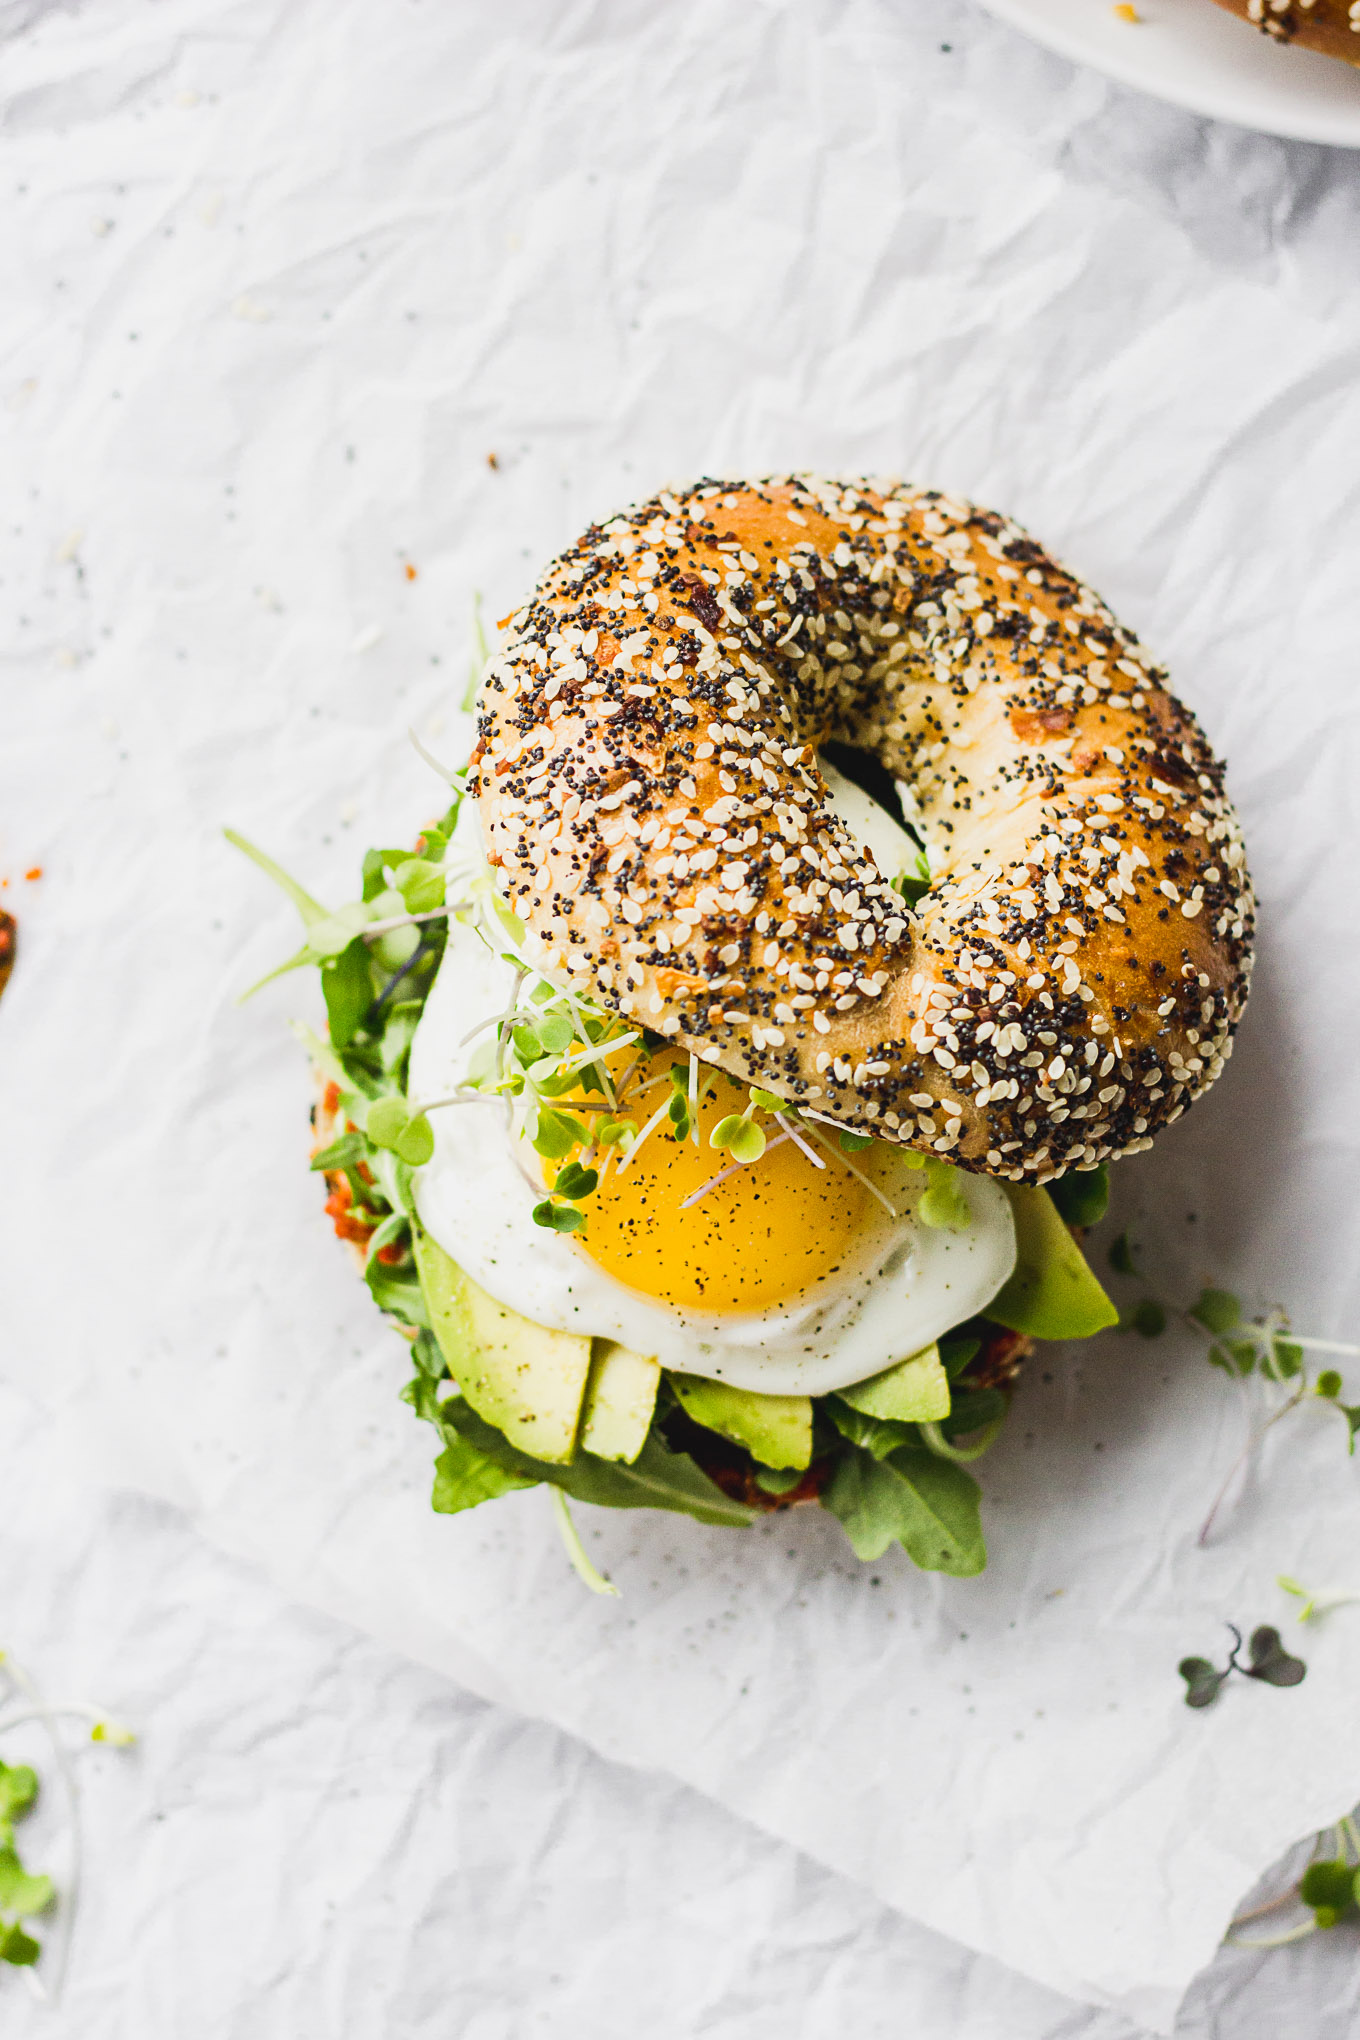 Bagel sandwich with top askew showing microgreens and fried egg.